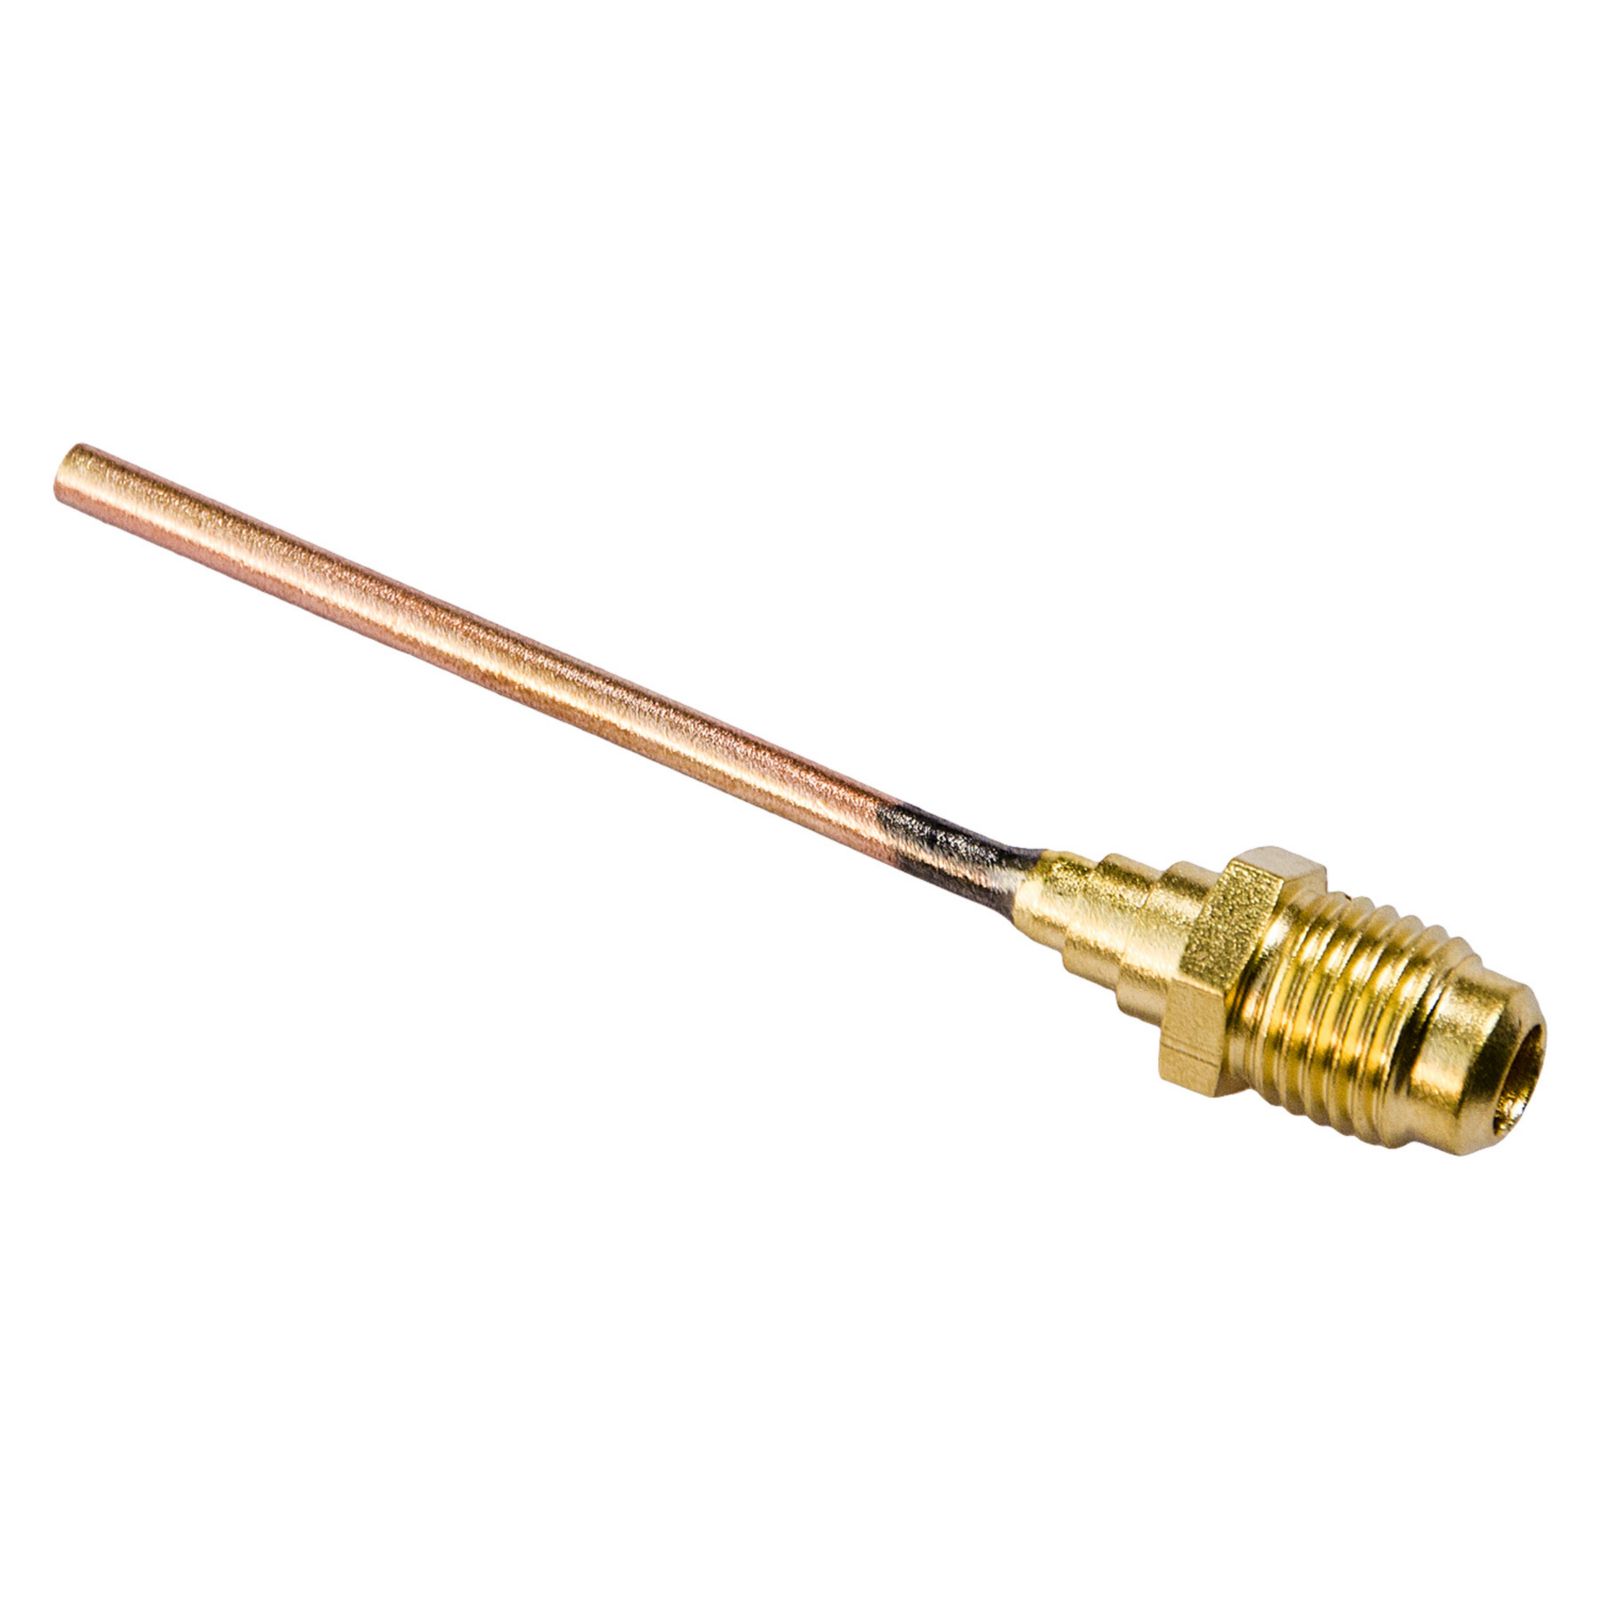 C&D Valve CD8408 - Economy Line Service Valve, Male Flare Access Fitting, 1/4", With Copper Tube Extension, 1/8"